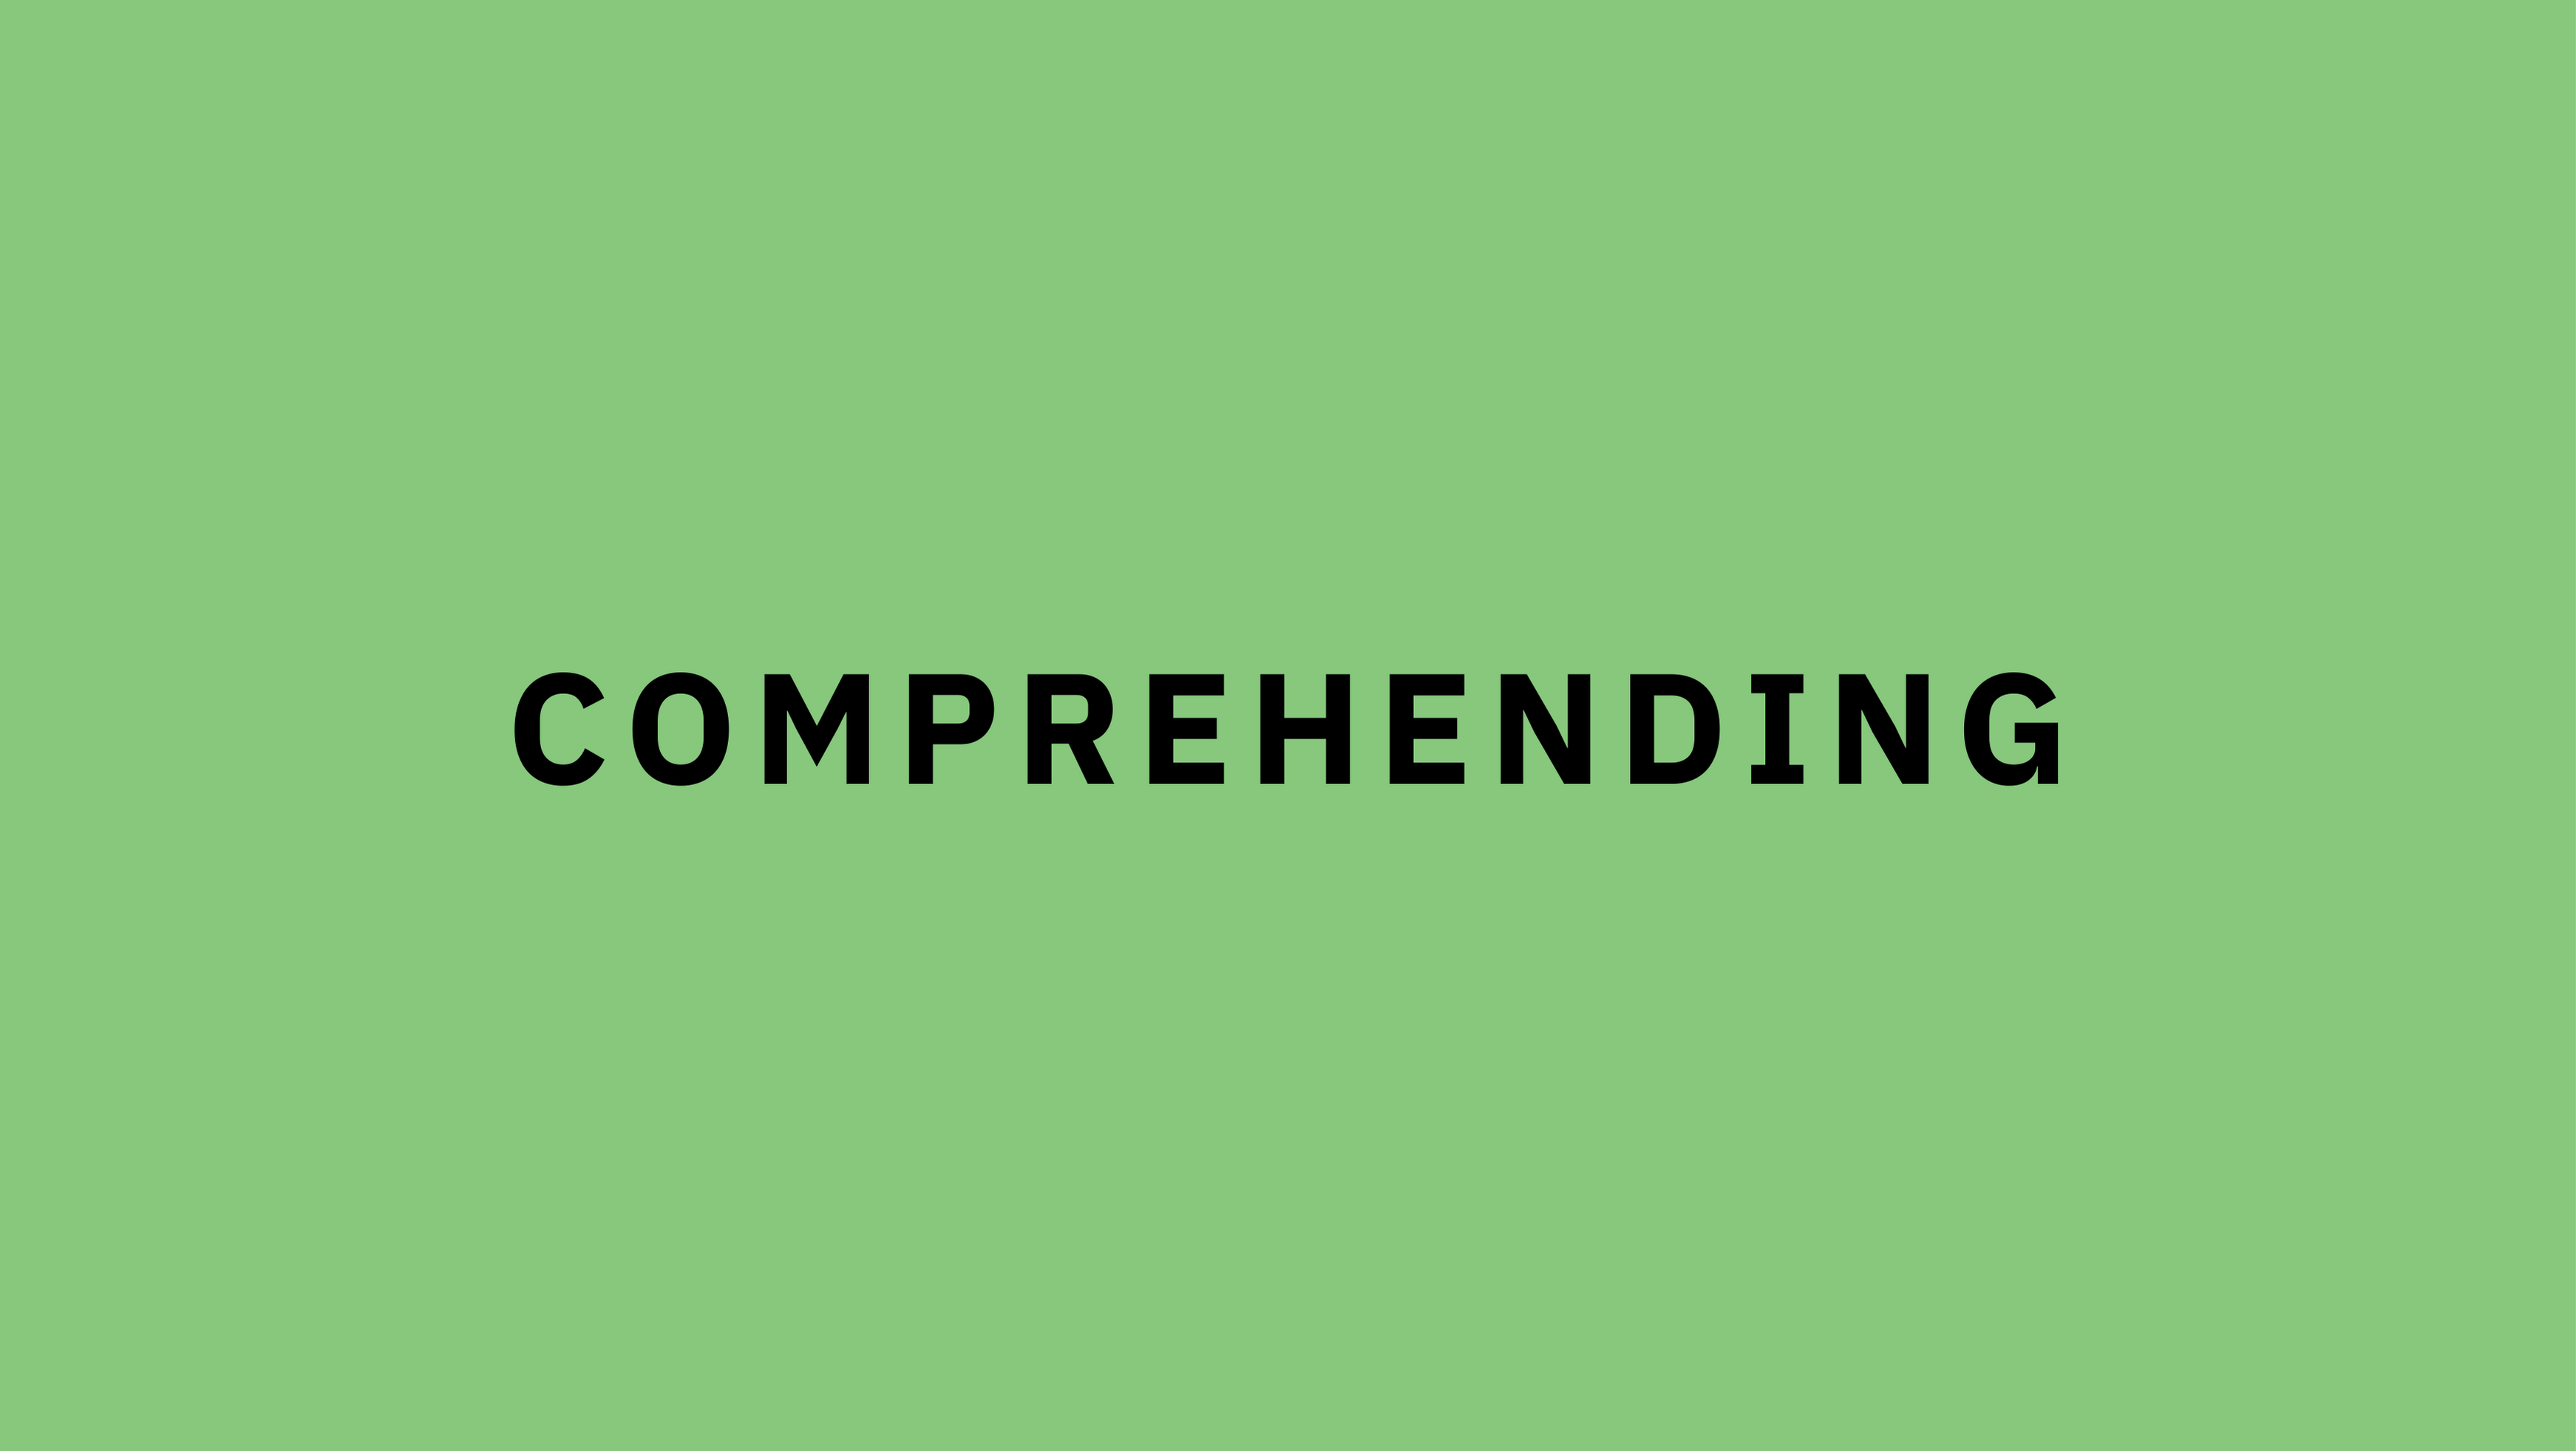 Section 1: Comprehending